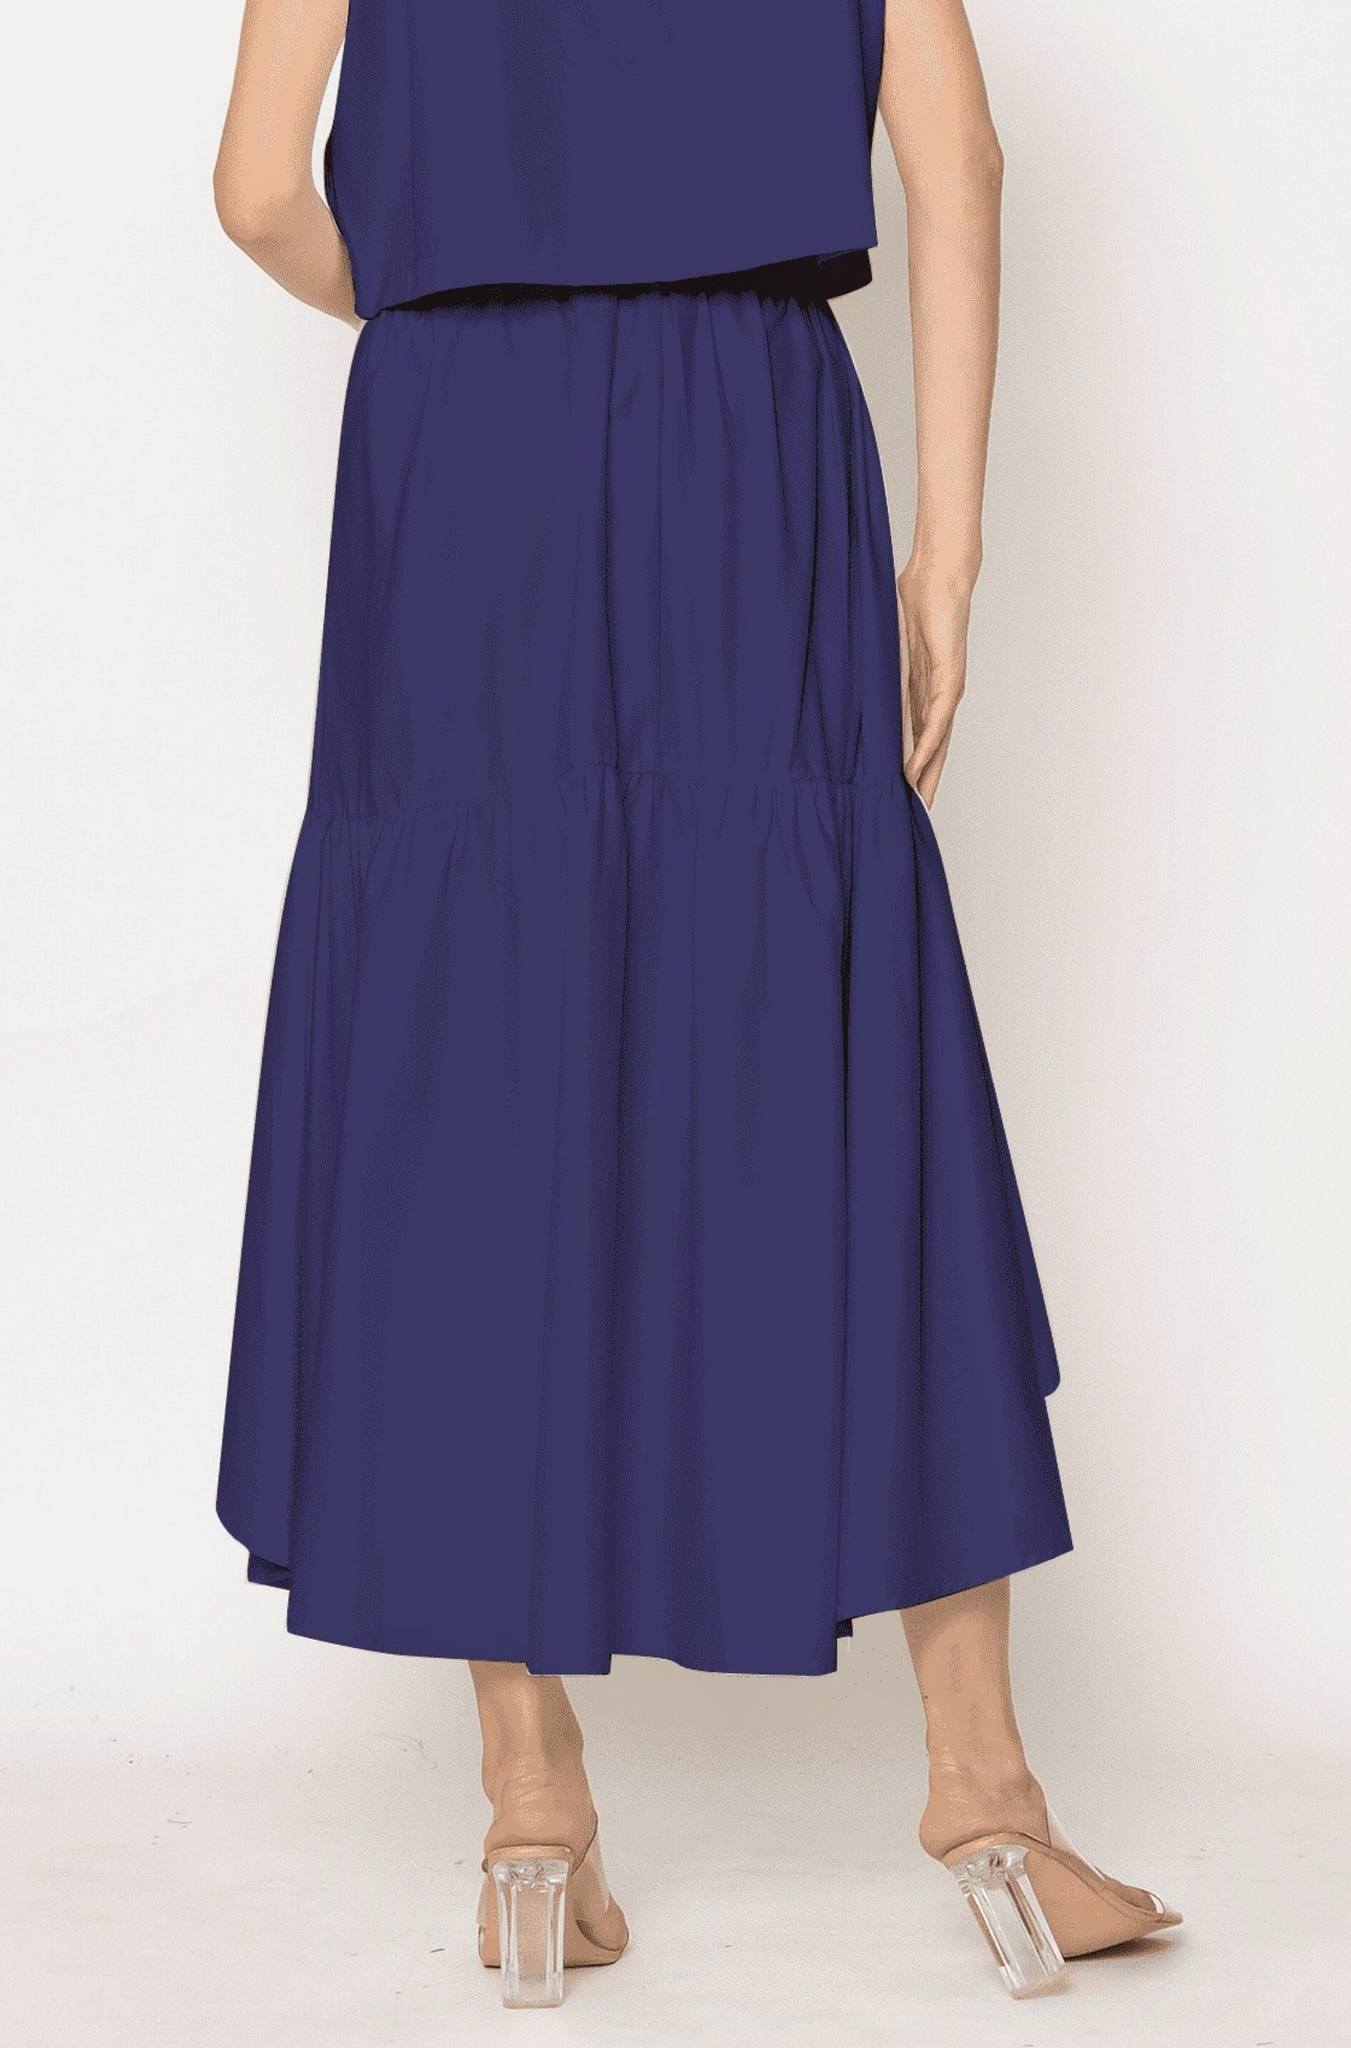 Nora. Frill Skirt with Frayed Details - Navy